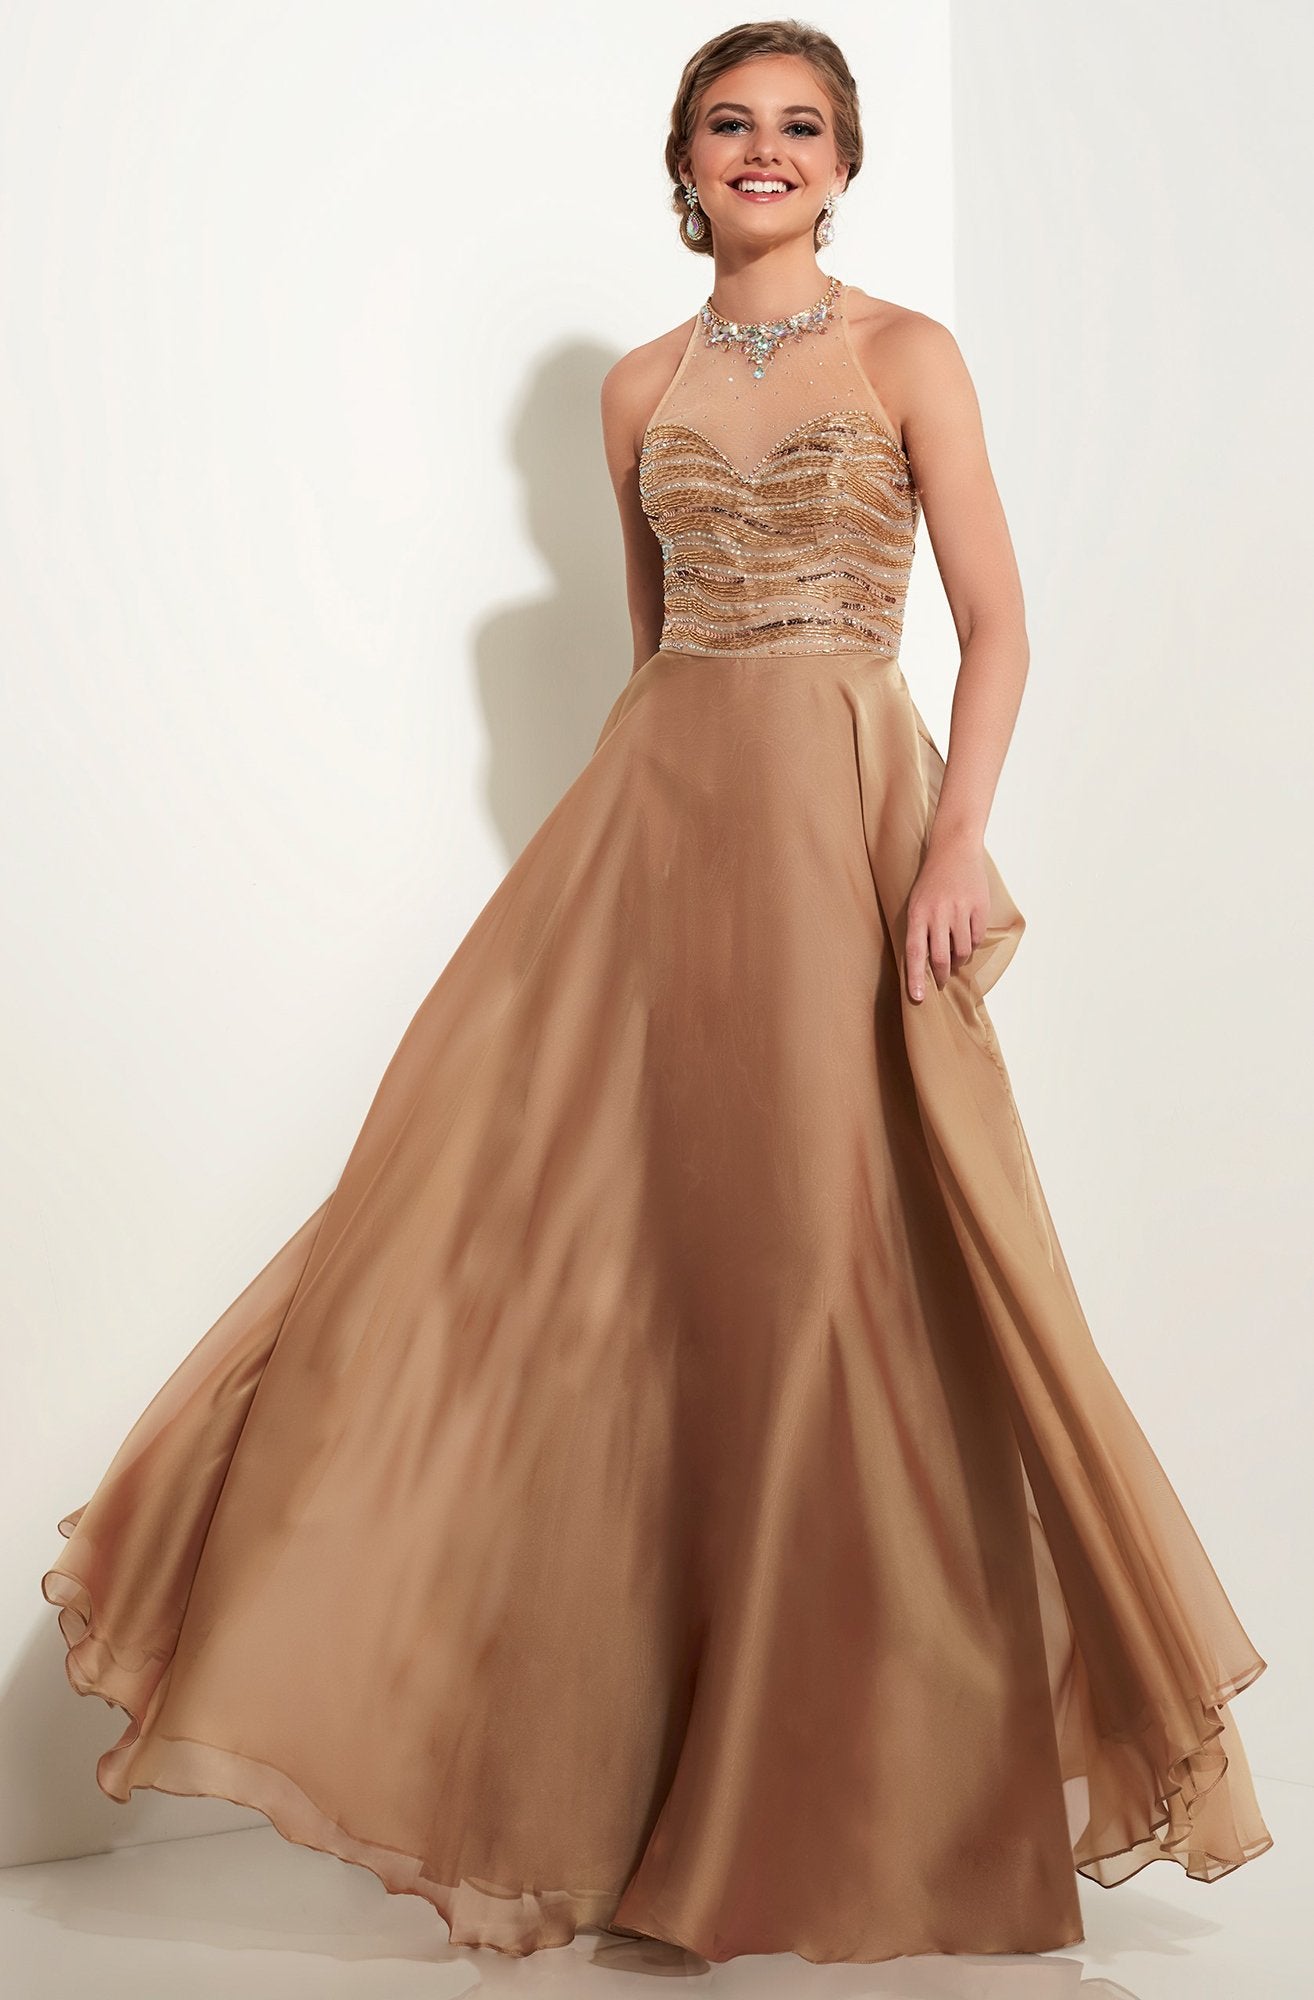 Studio 17 - Bejeweled High Halter Neck Two Tone Chiffon A-line Dress 12597 In Gold